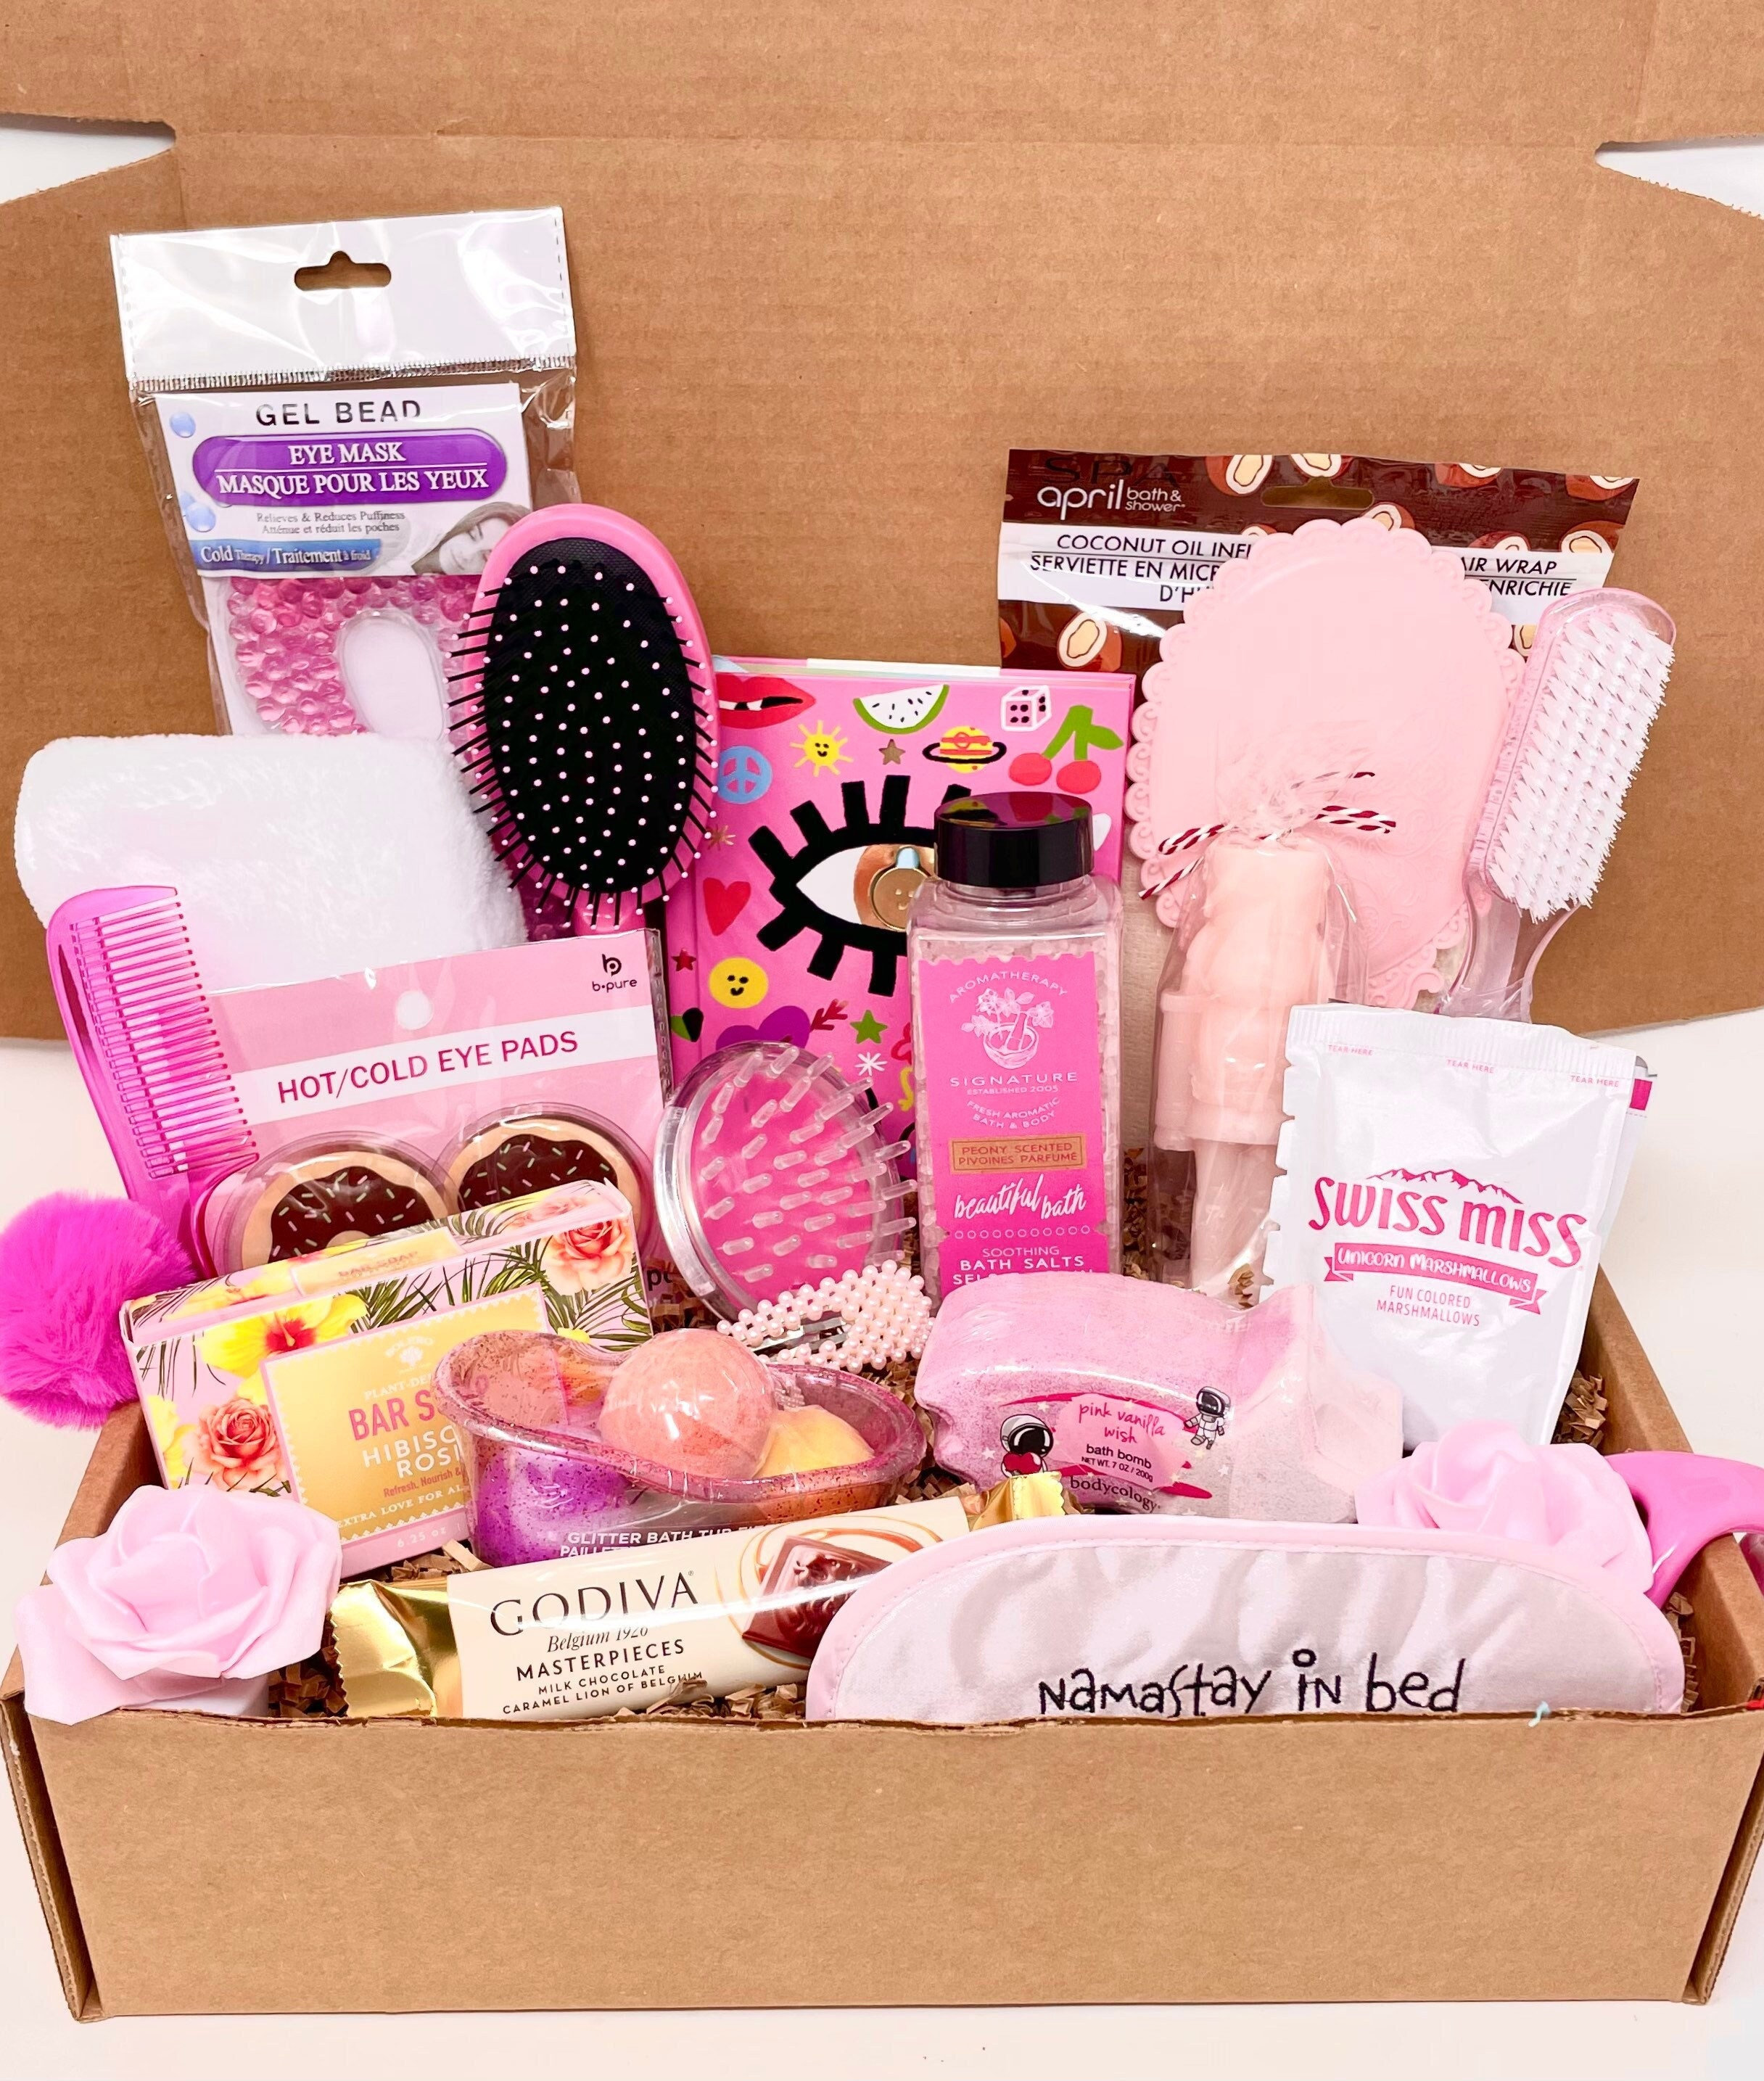 Mini Self Care Letterbox Gift Birthday Gifts for Her Pink Luxury Relaxation  Spa Pamper Box Pick Me up Gift Pink Pamper Hamper Box 